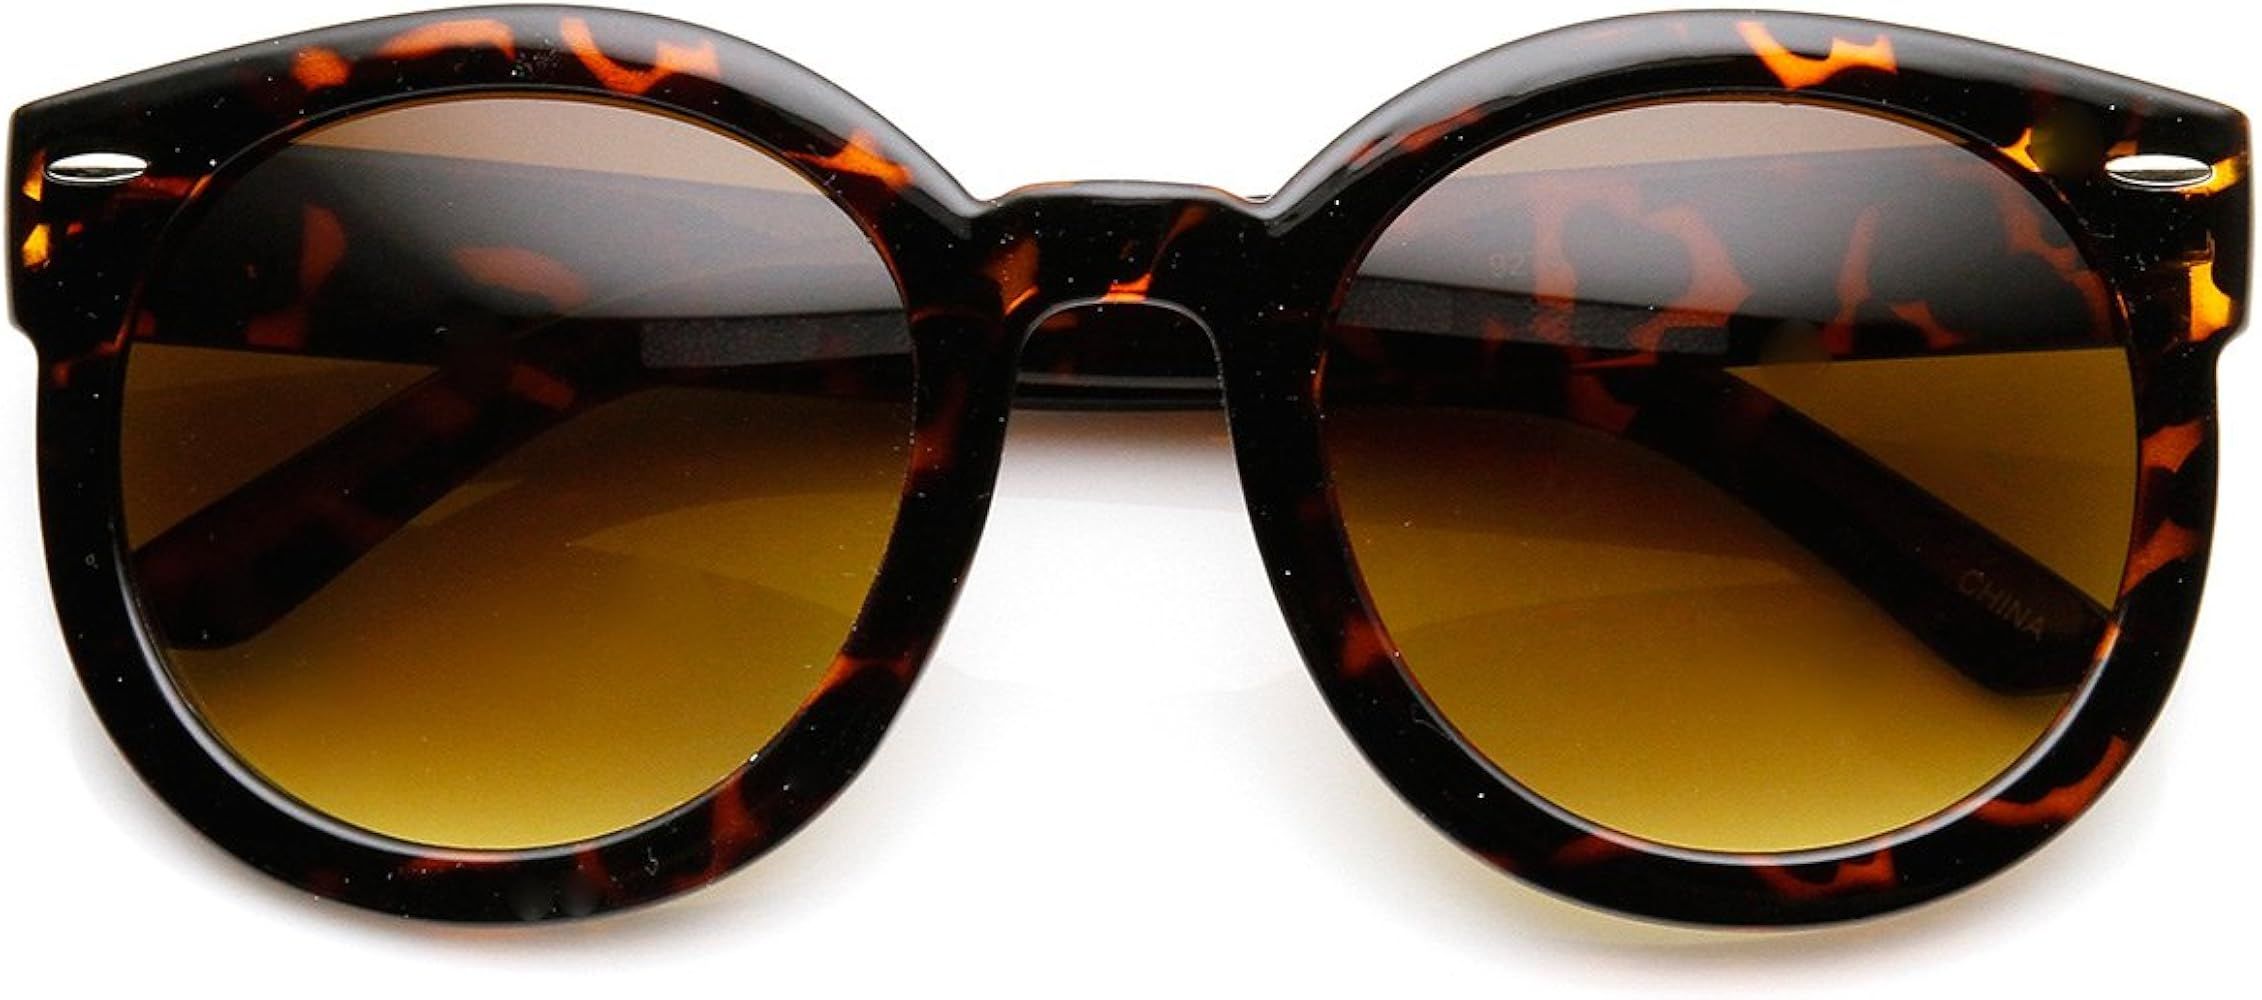 zeroUV - Round Retro Oversized Sunglasses for Women with Colored Mirror and Neutral Lens 53mm | Amazon (US)